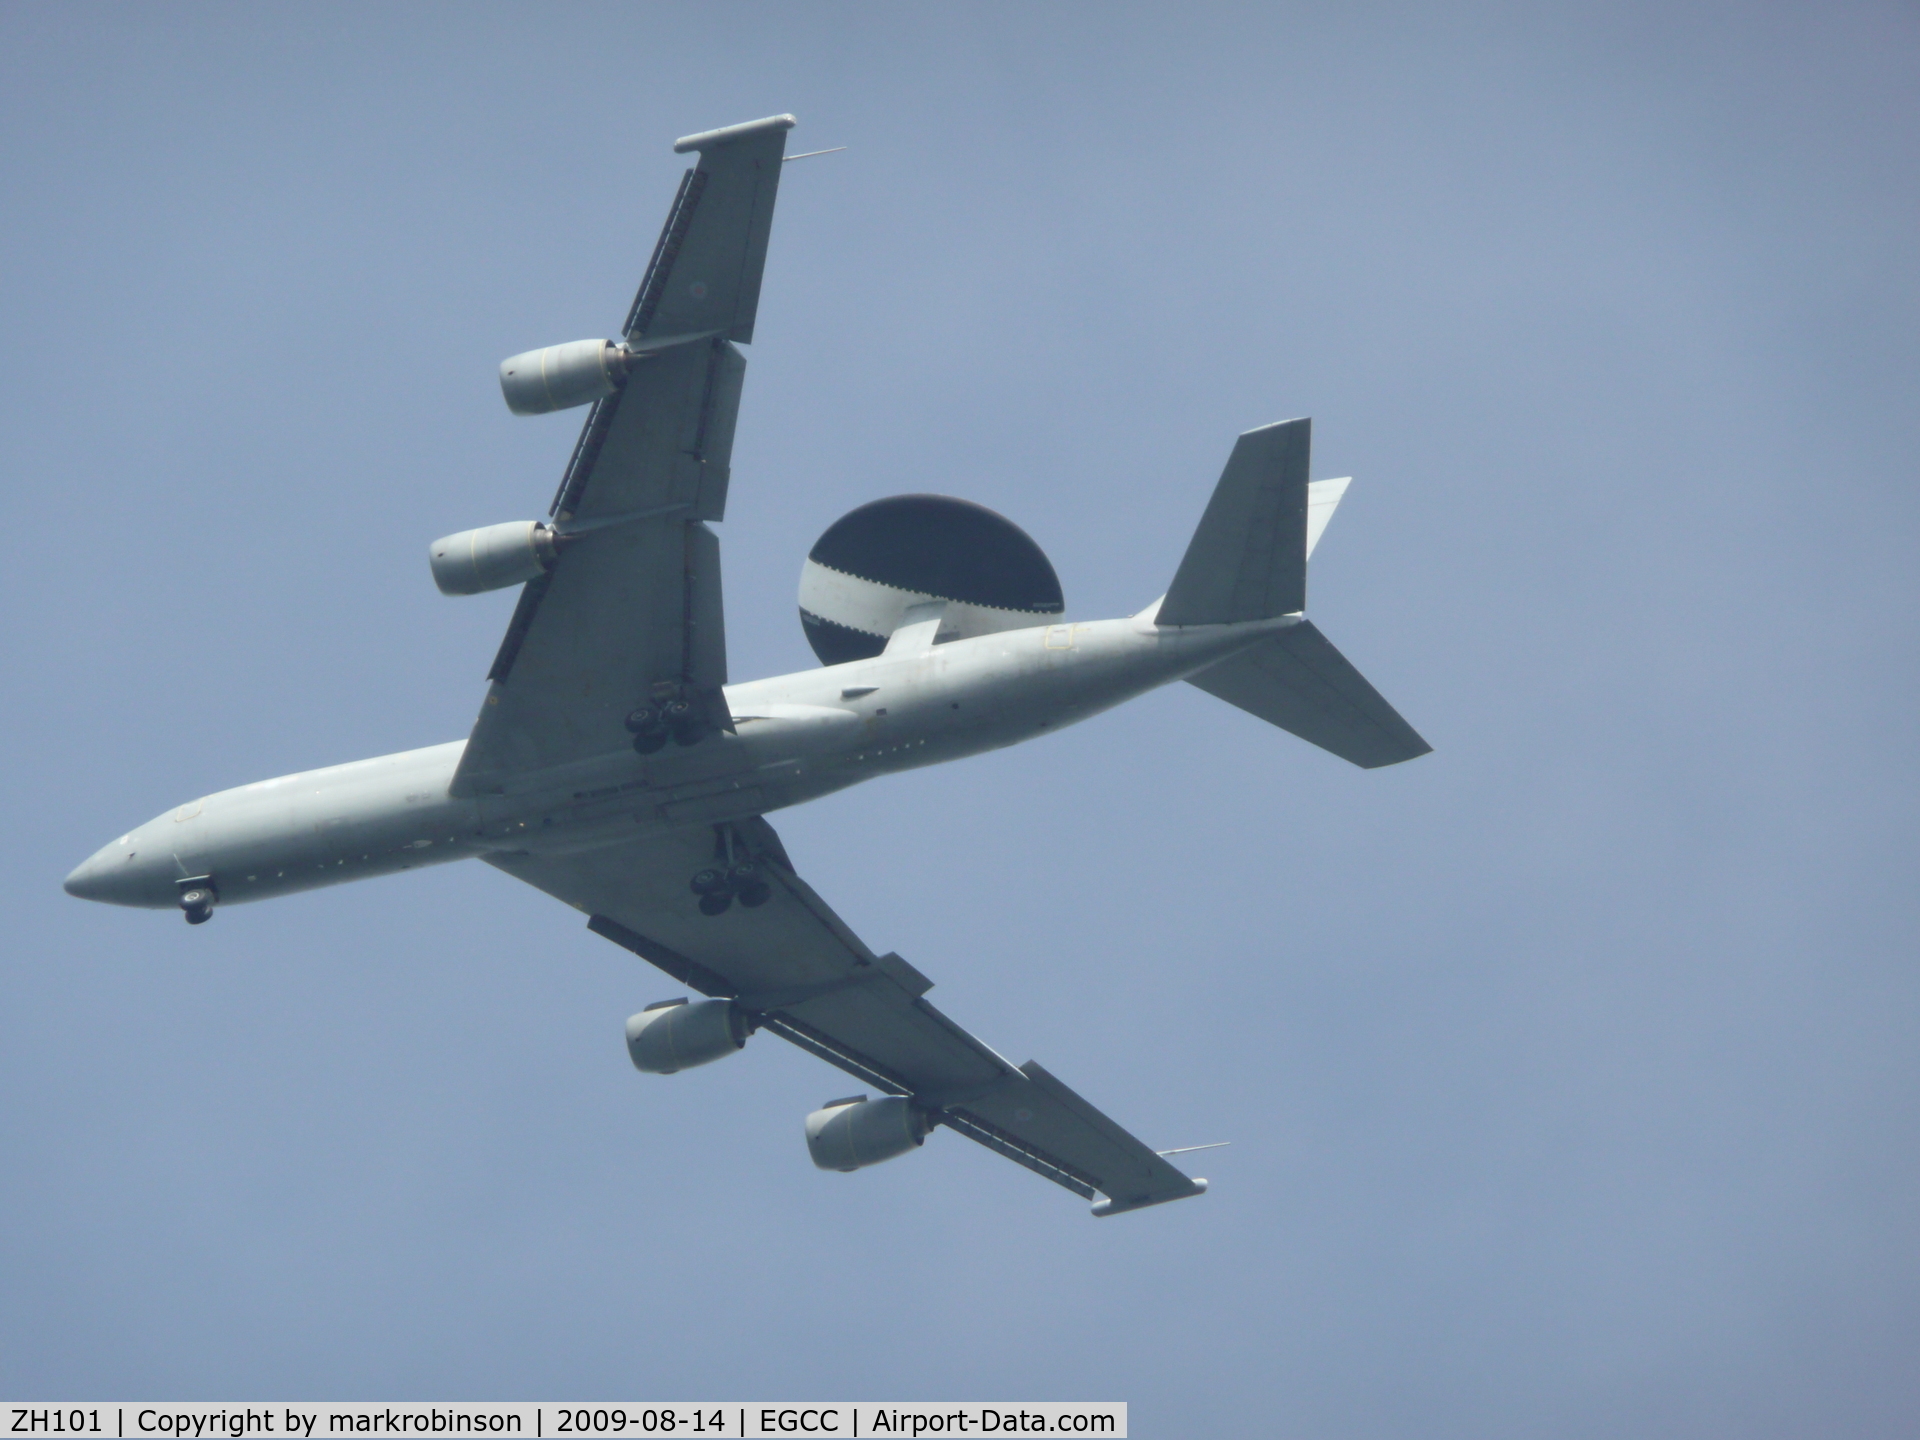 ZH101, 1989 Boeing E-3D Sentry AEW.1 C/N 24109, seen on the ILS for runway 23R MAN-EGCC call/sign [NATO 10]